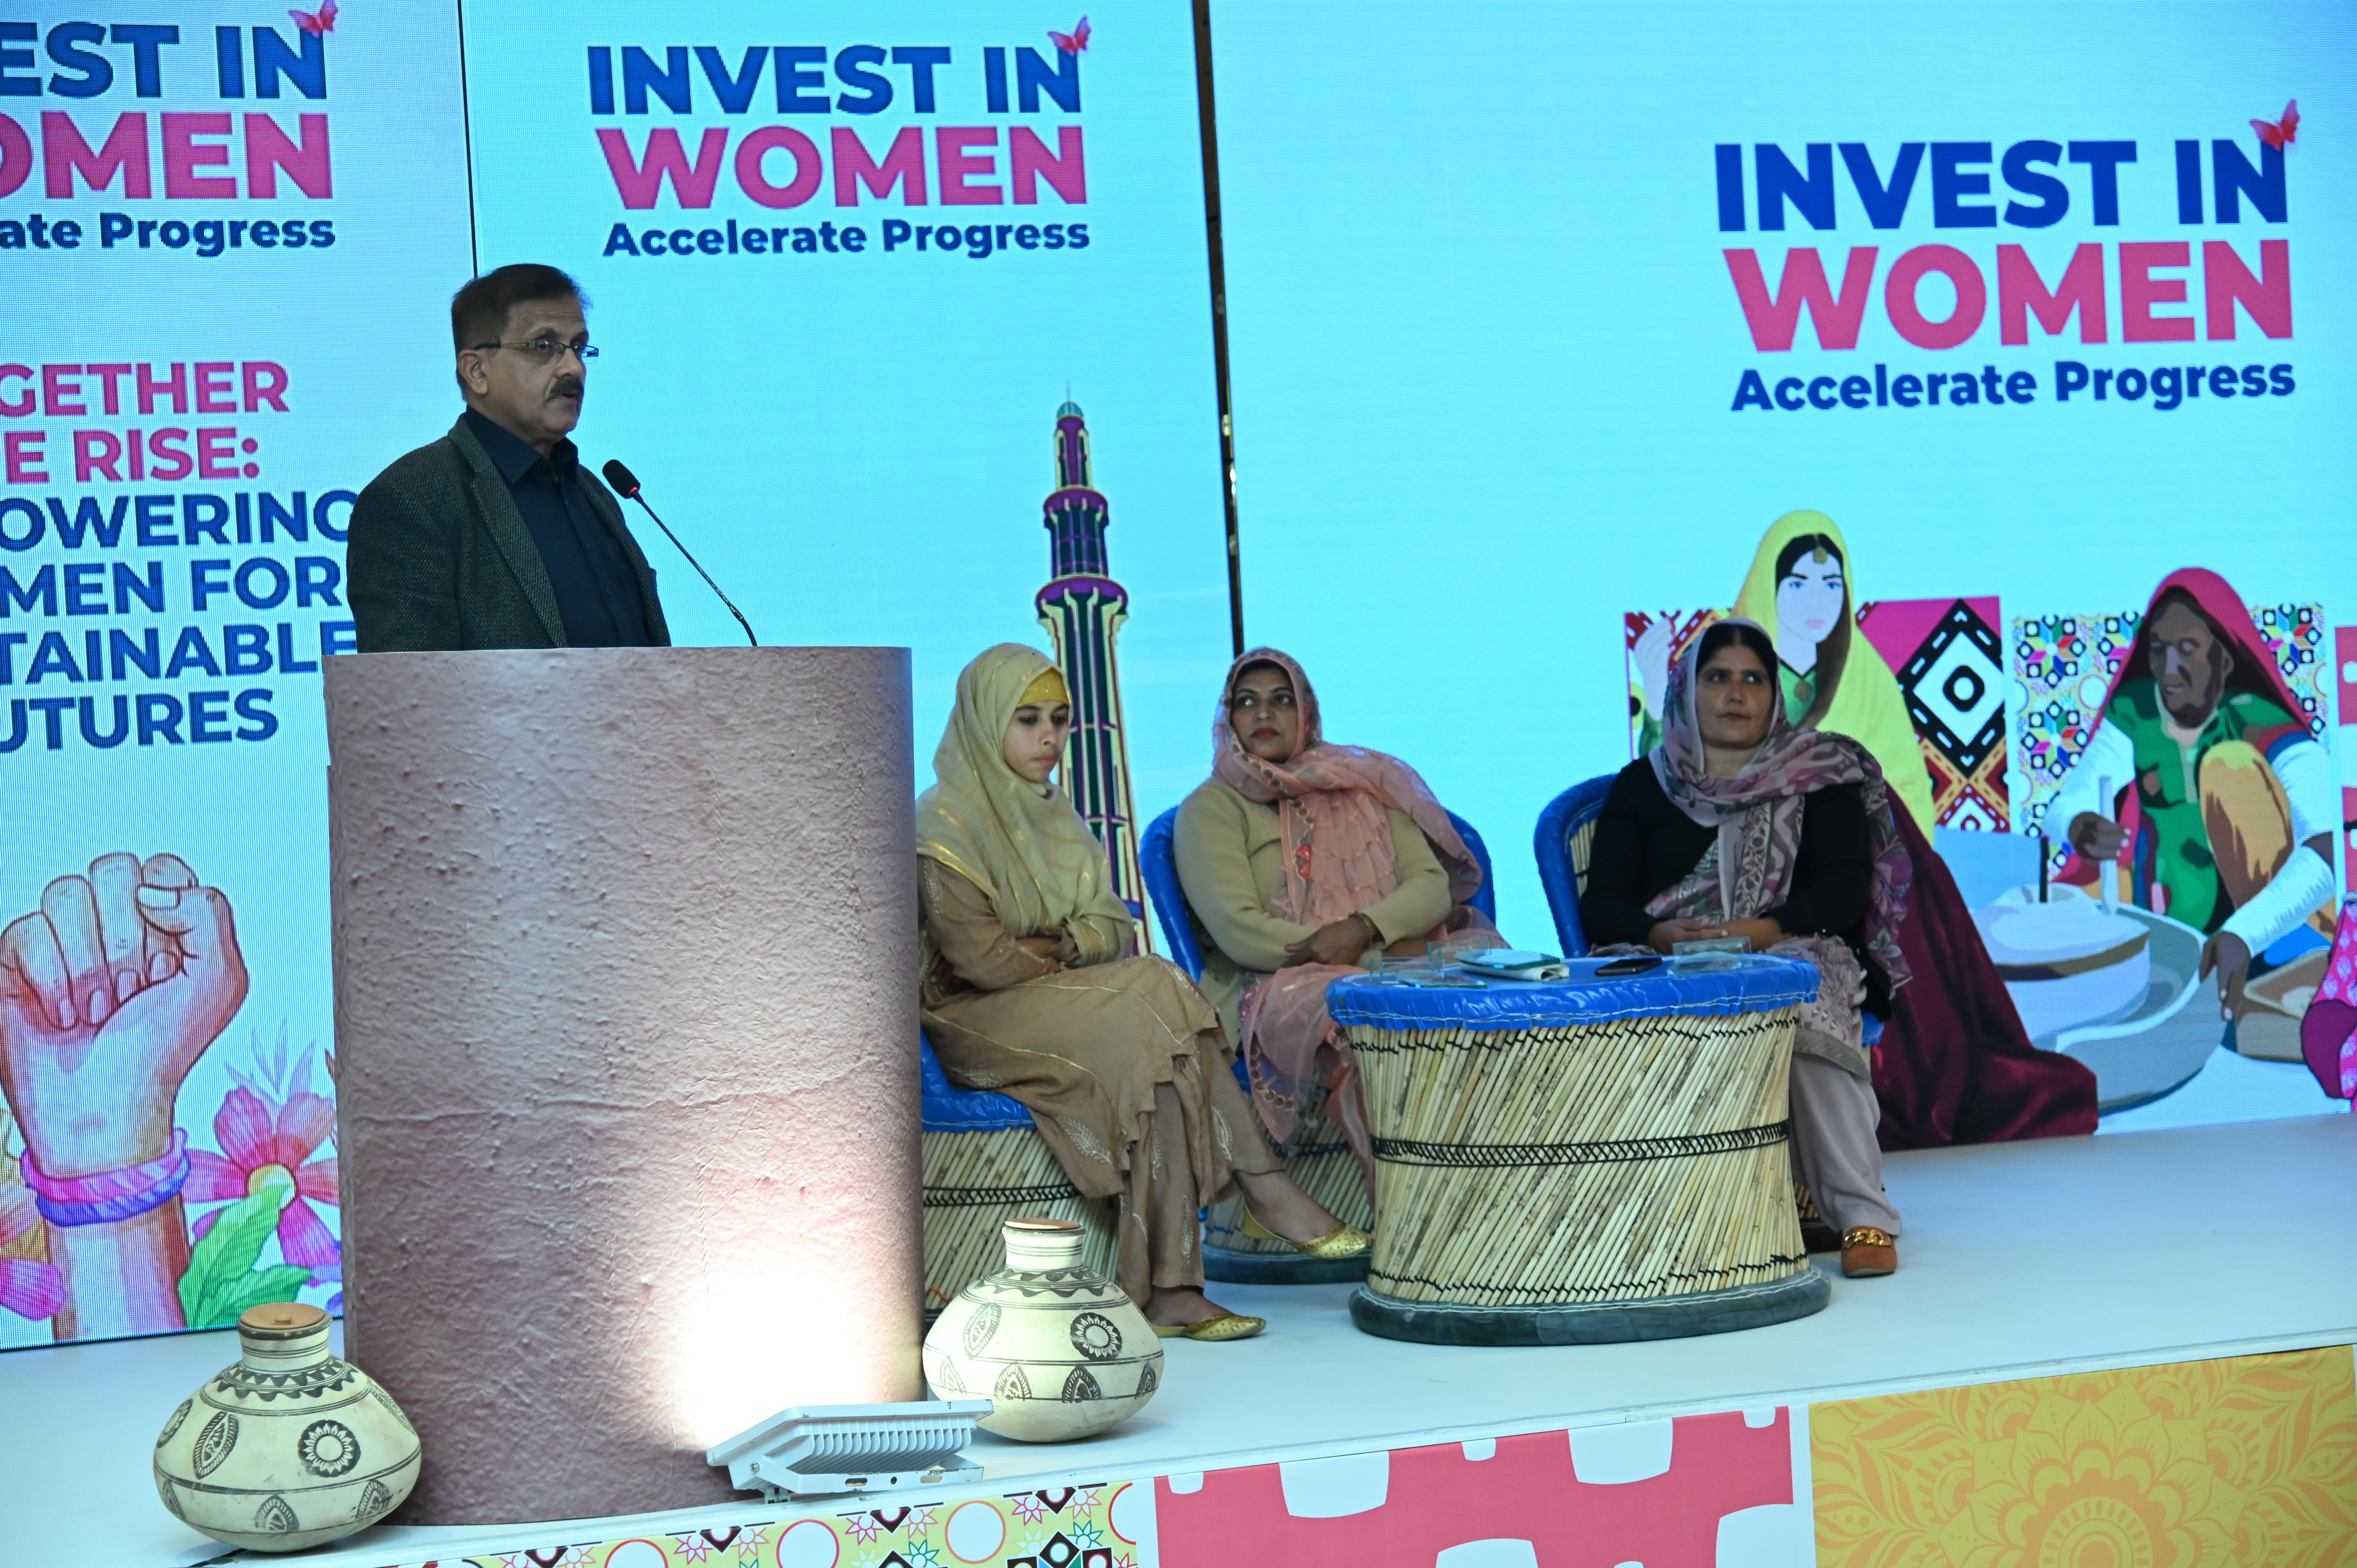 The chief guest expressing his views about the active role of women in enhancing both society and the economy